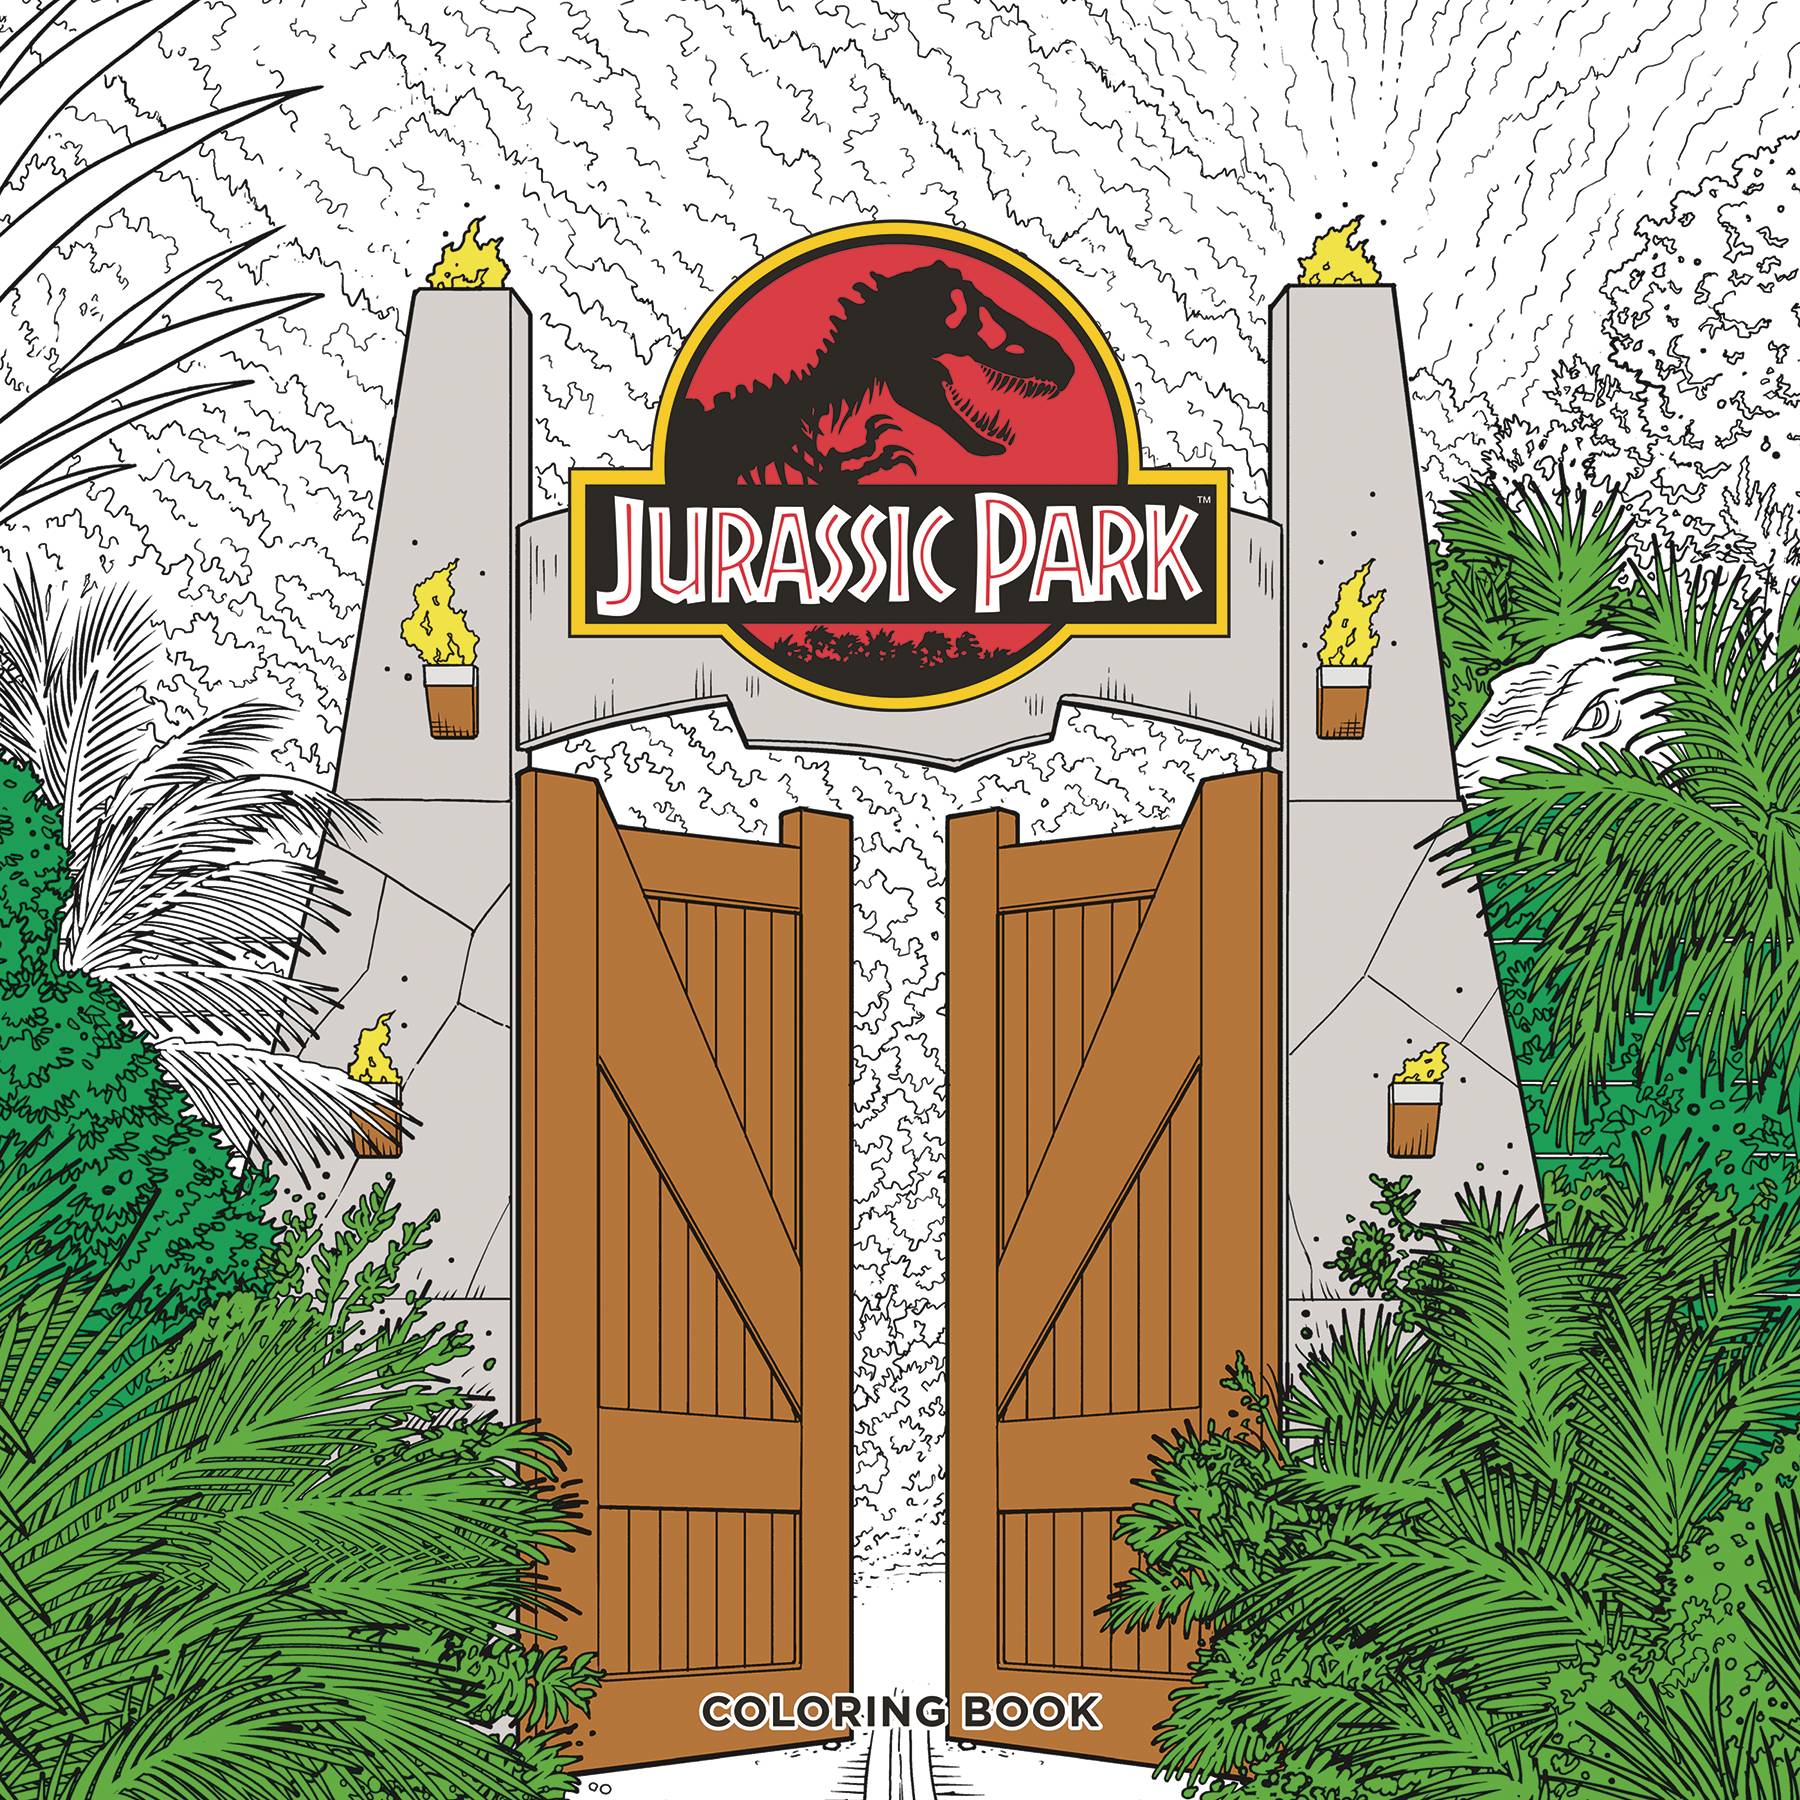 Jurassic Park Adult Coloring Book Graphic Novel